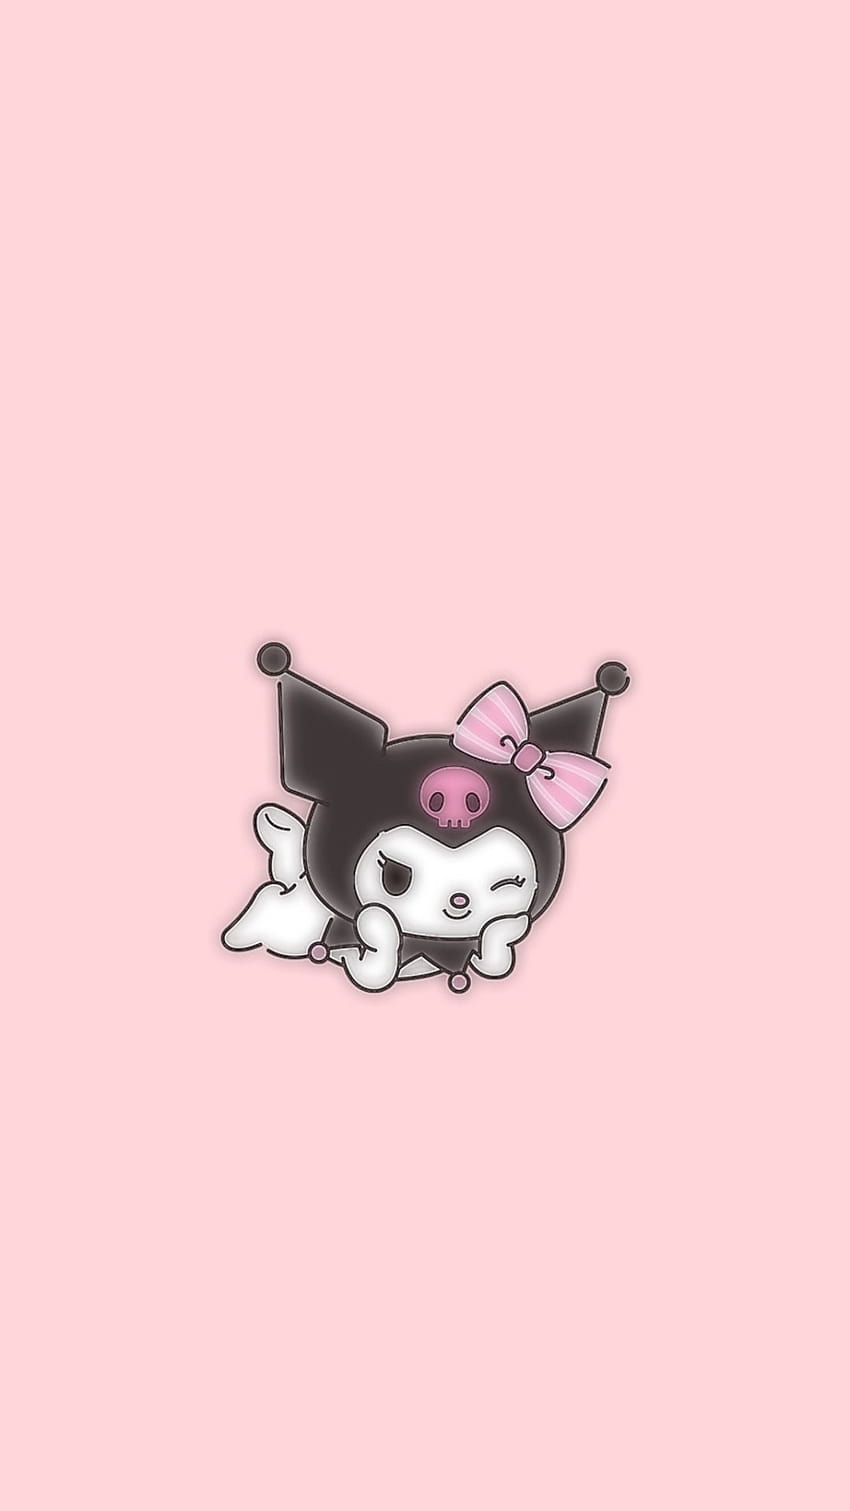 Hello Kitty Cute Wallpaper For Android Phone Hd Cute Wallpapers For Phones  Mobile Hd Tumblr Iphone With Quotes Facebook Android Desktop Of Dolls For  Phones  फट शयर